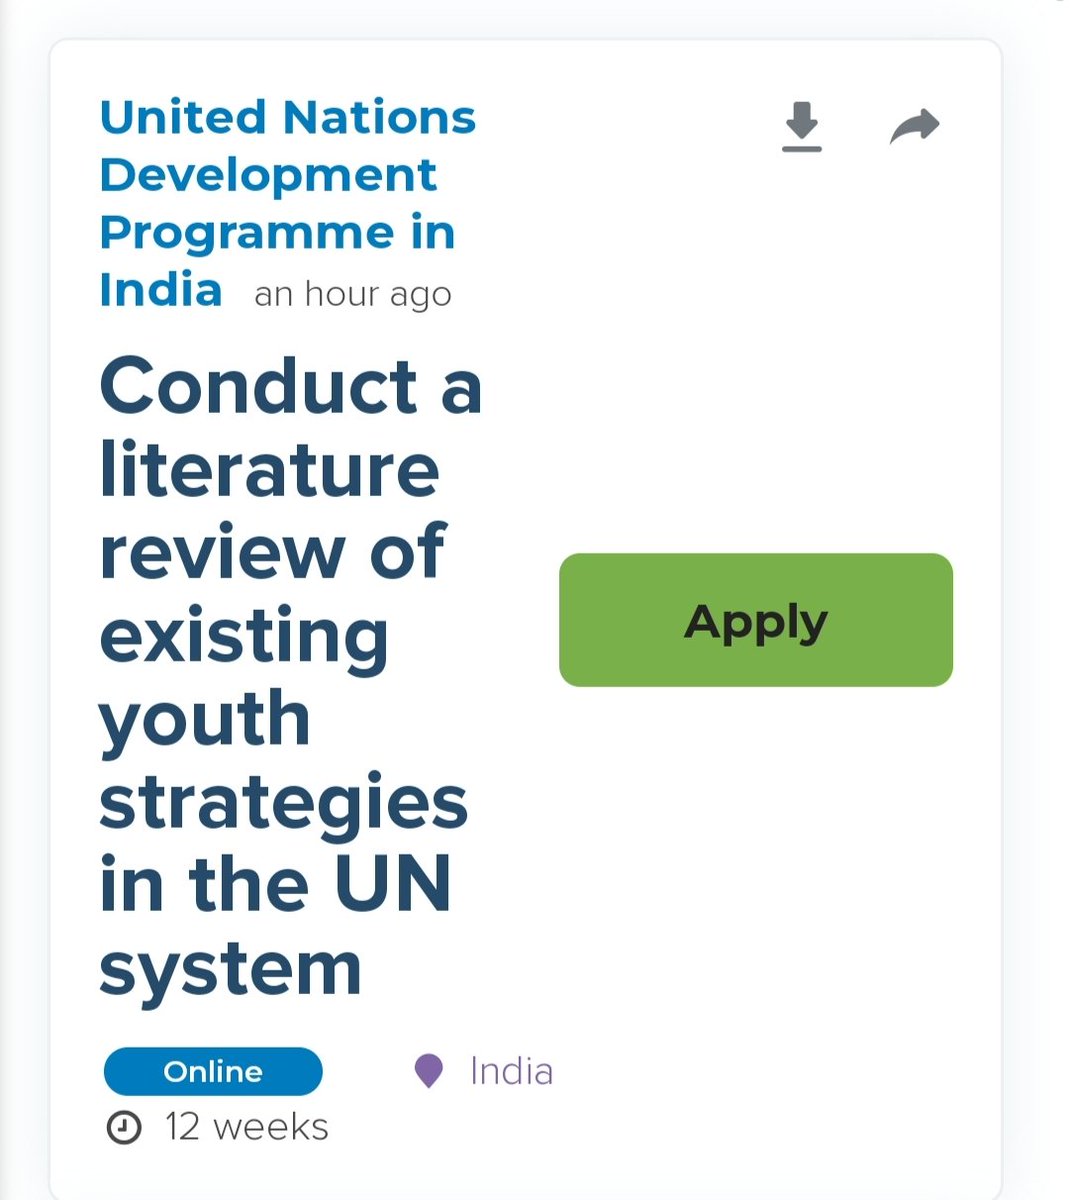 Are you interested in working with the #youth teams of @UNDP_India and @UNDPPH? Want to help us support young people better?
A+ at #research and looking to #volunteer?

Join us 2 develop a #youthstrategy toolkit! app.unv.org/opportunities/…